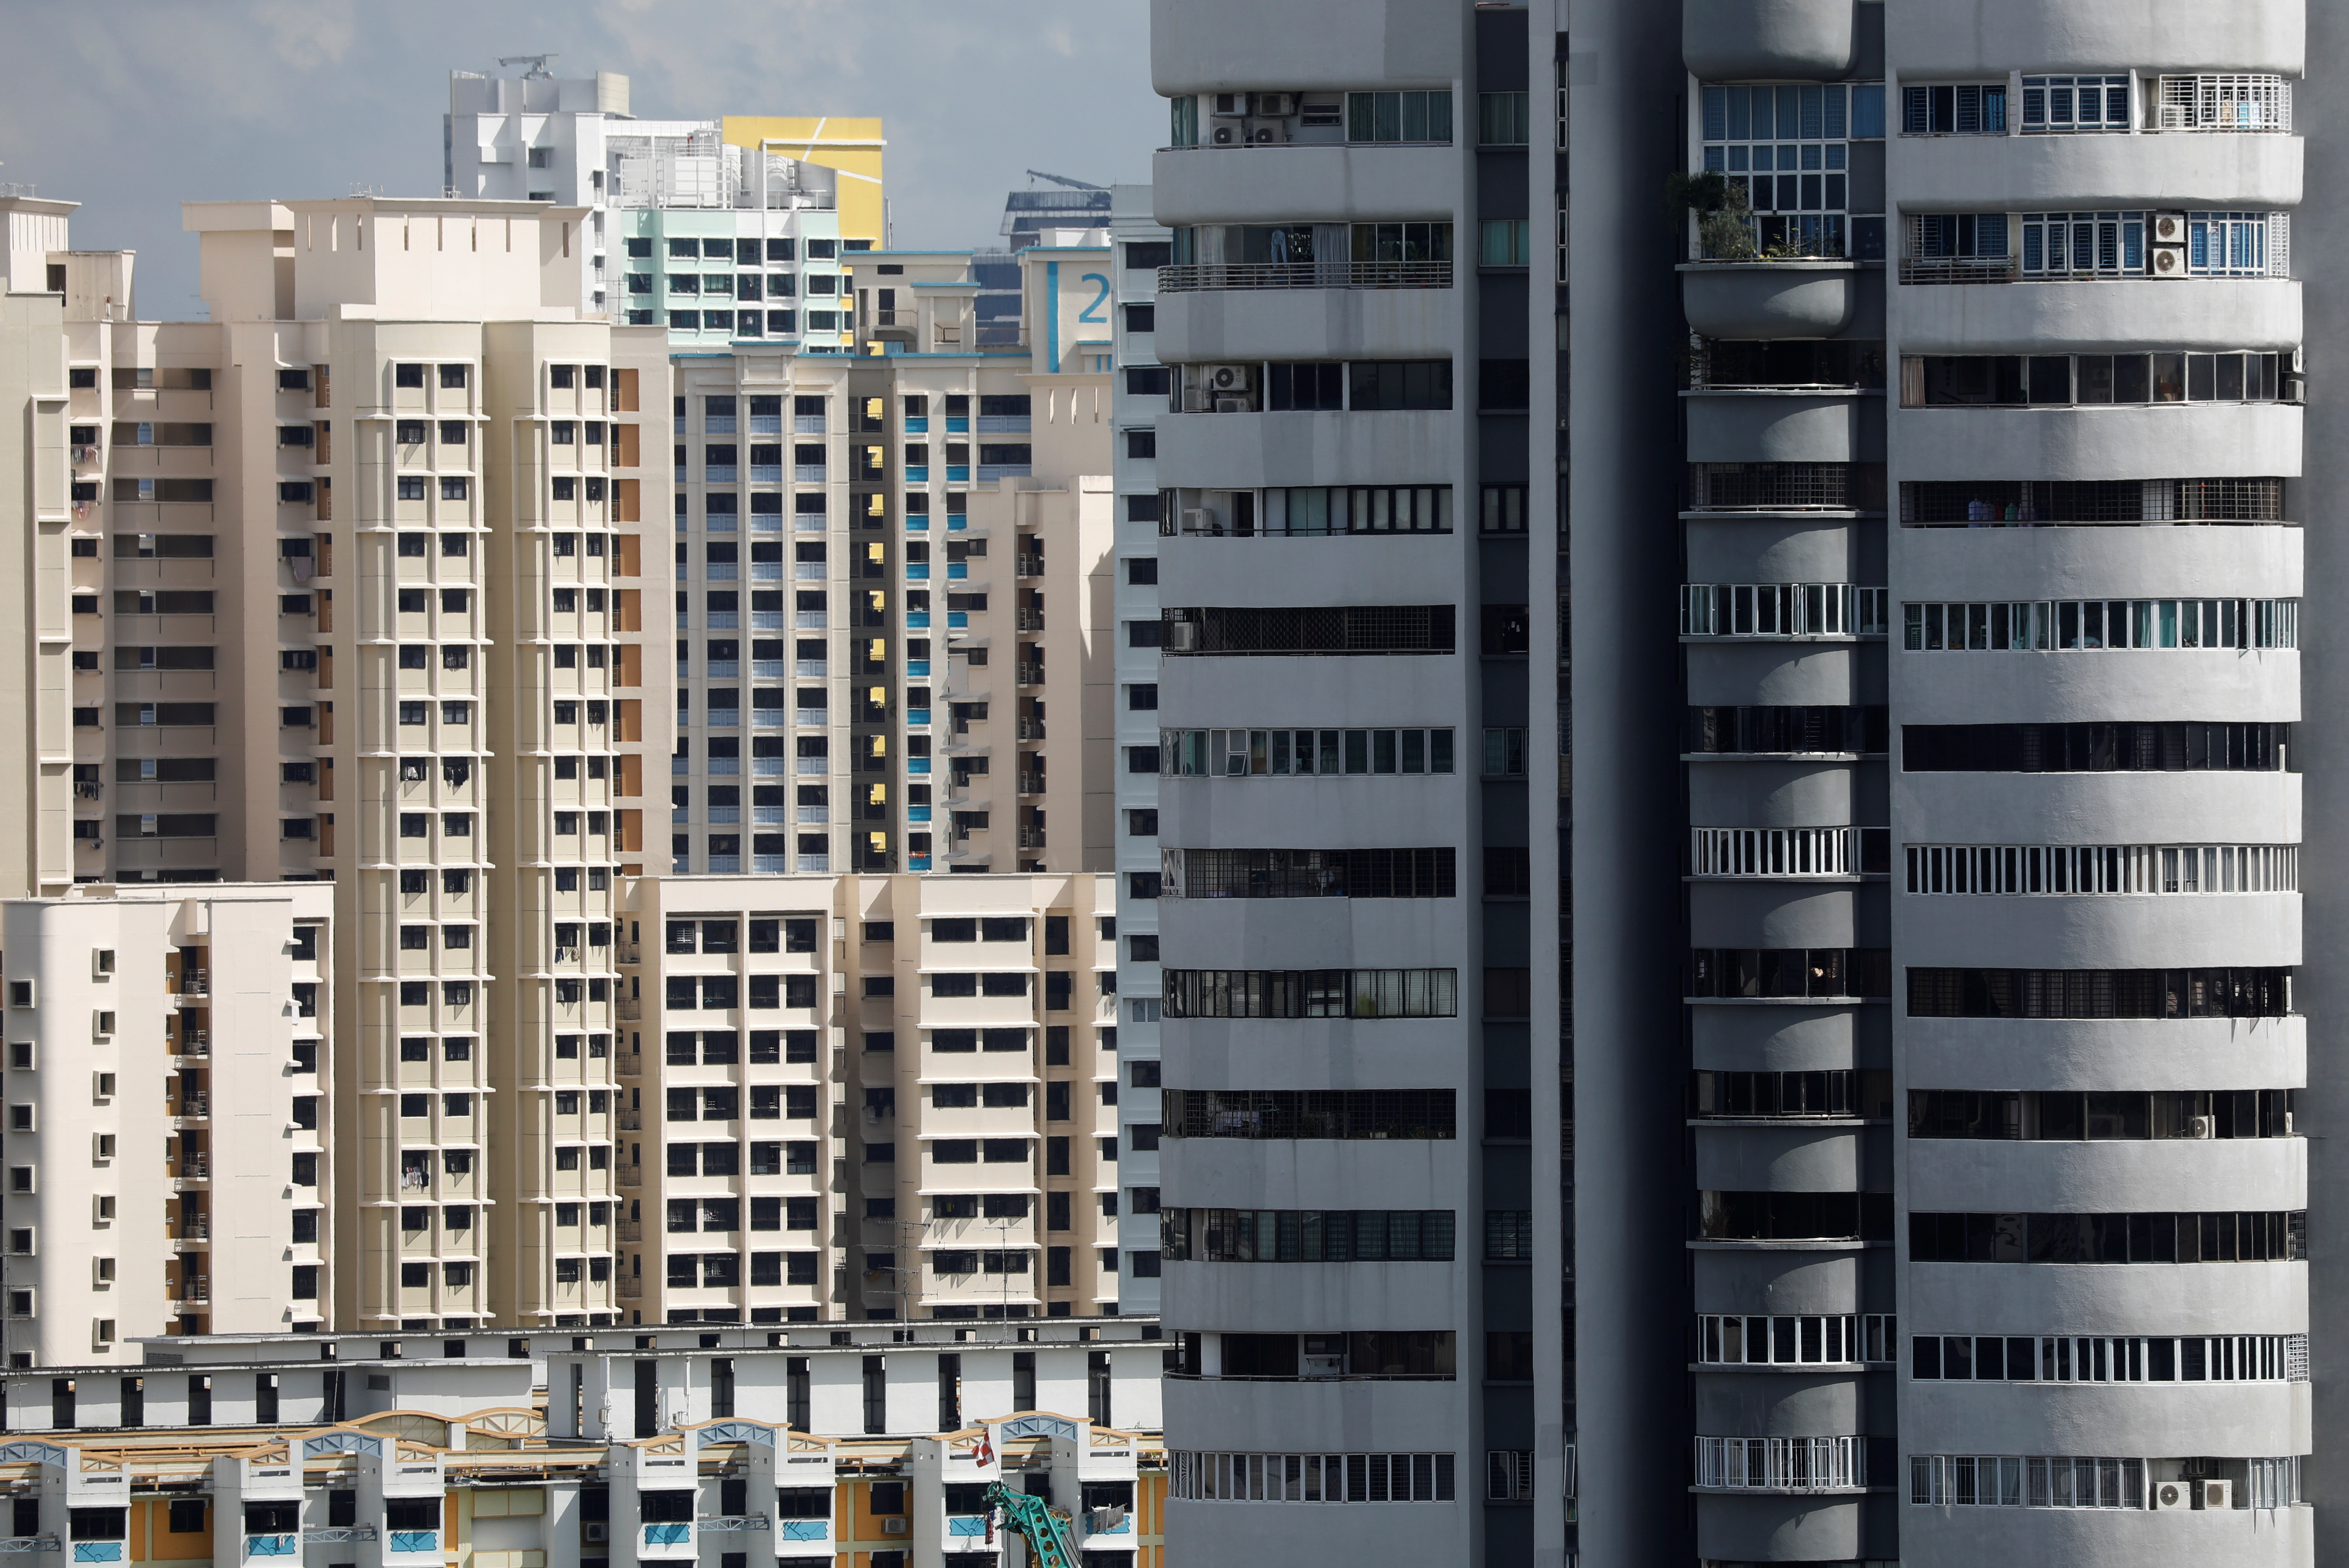 A view of a private residential condominium in front of public housing estates in Singapore